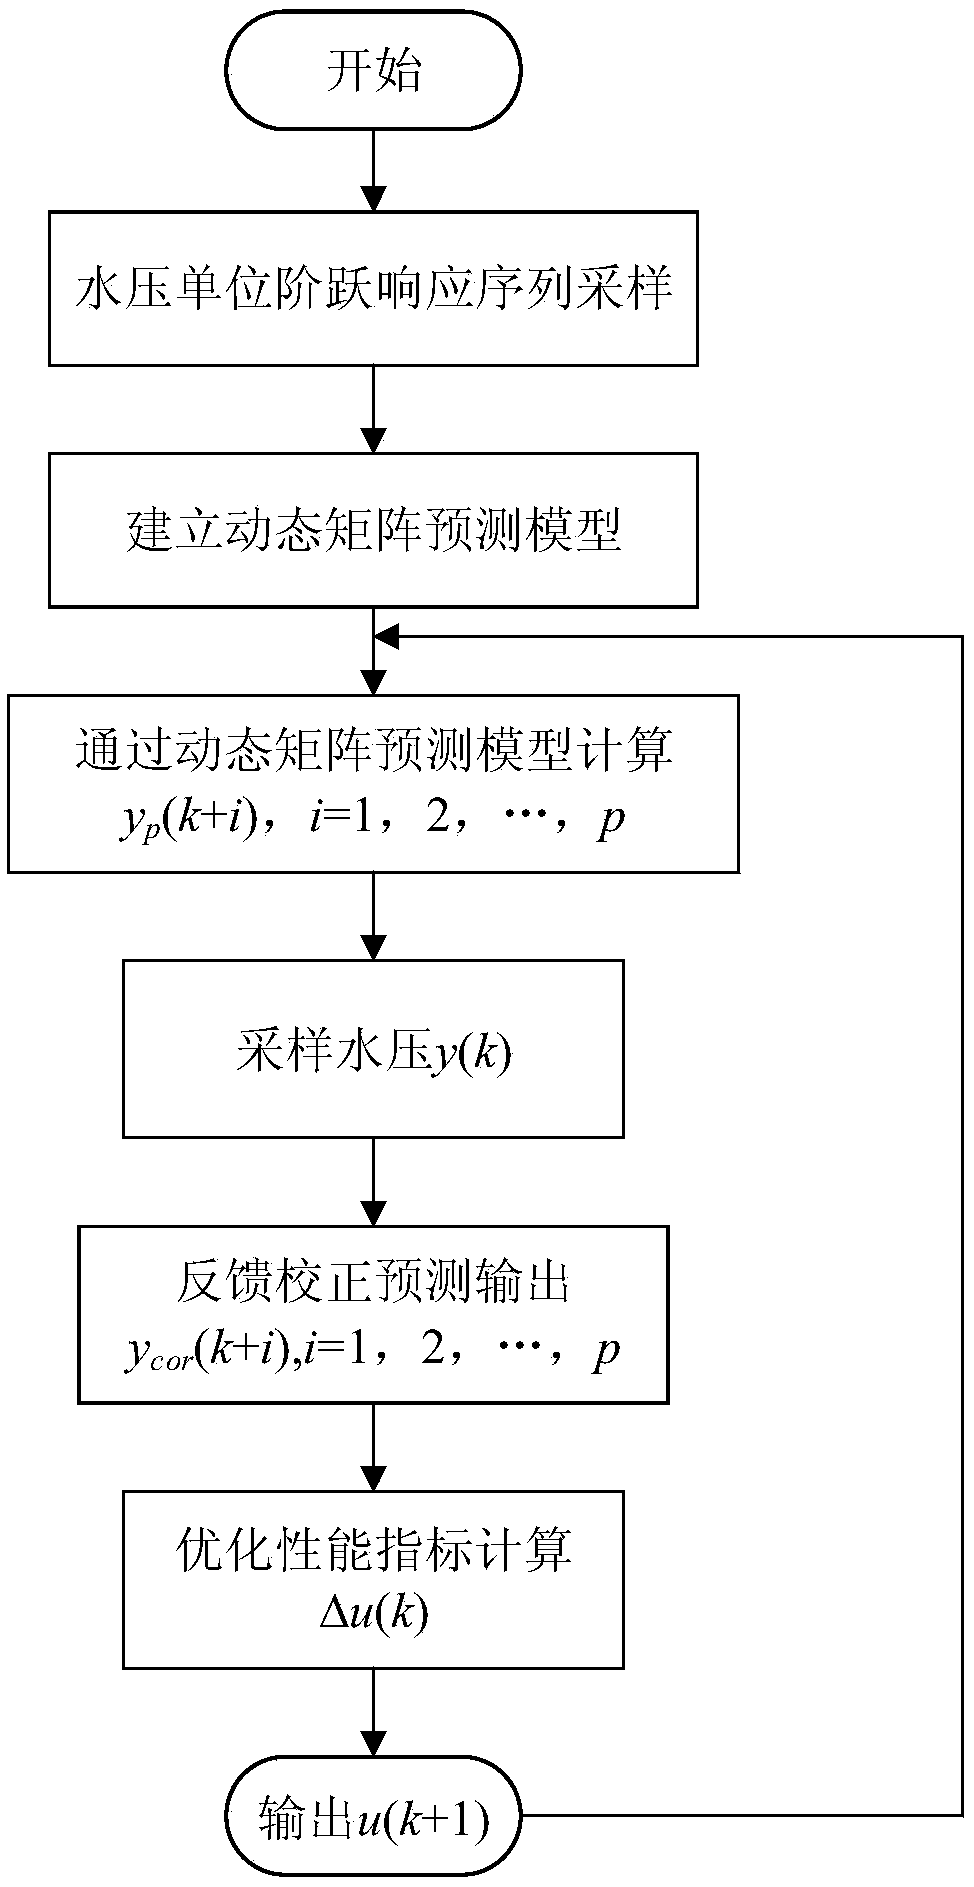 Water pressure prediction and control method for automatic cleaning process of herbal medicine